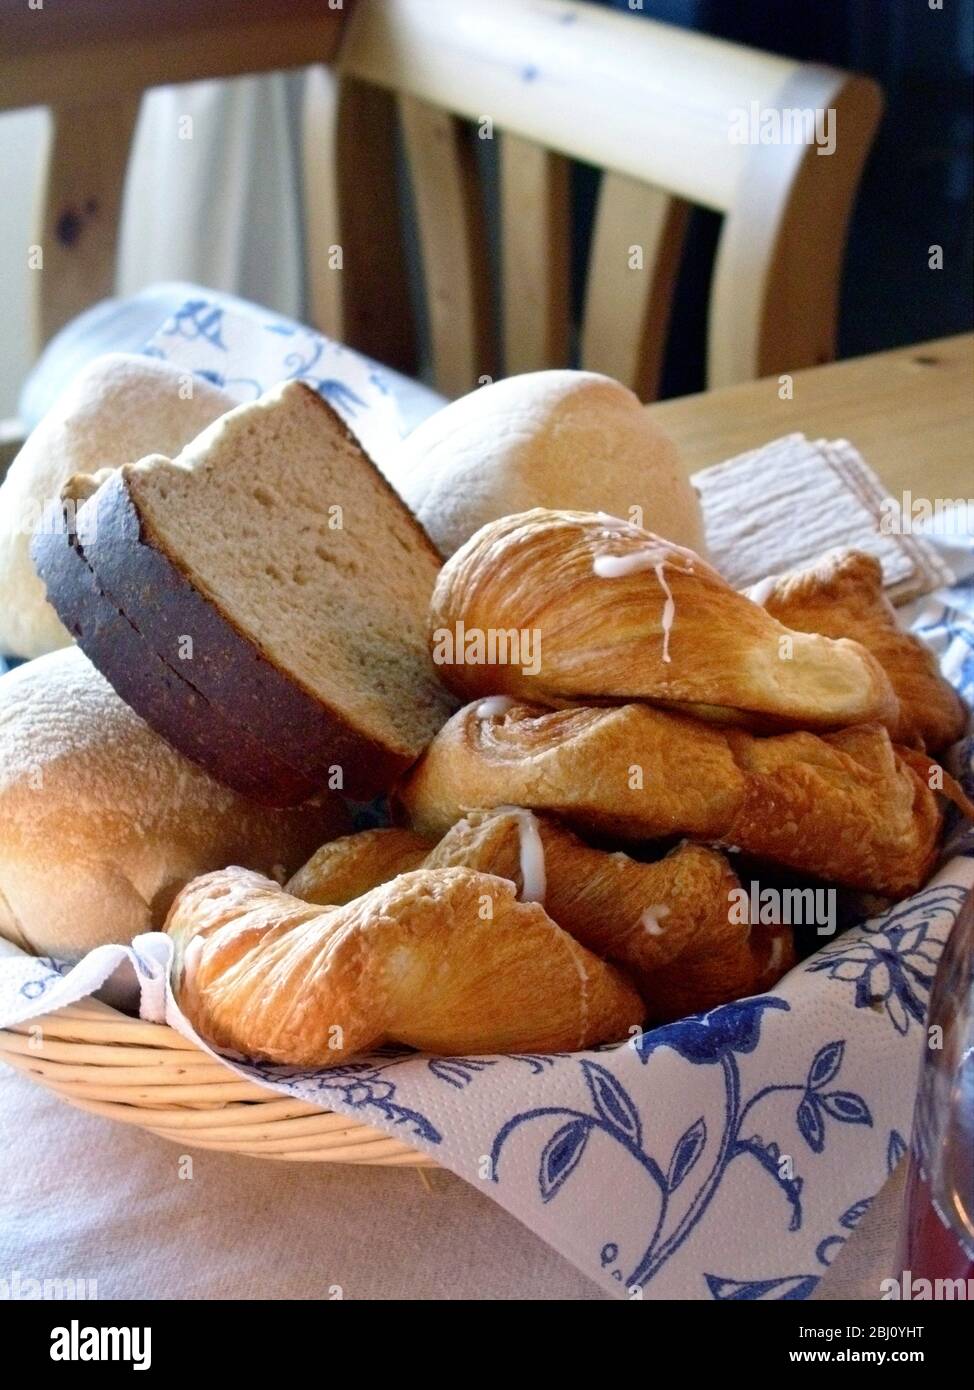 A collection of various breads and pastries in basket on table. Sweden - Stock Photo